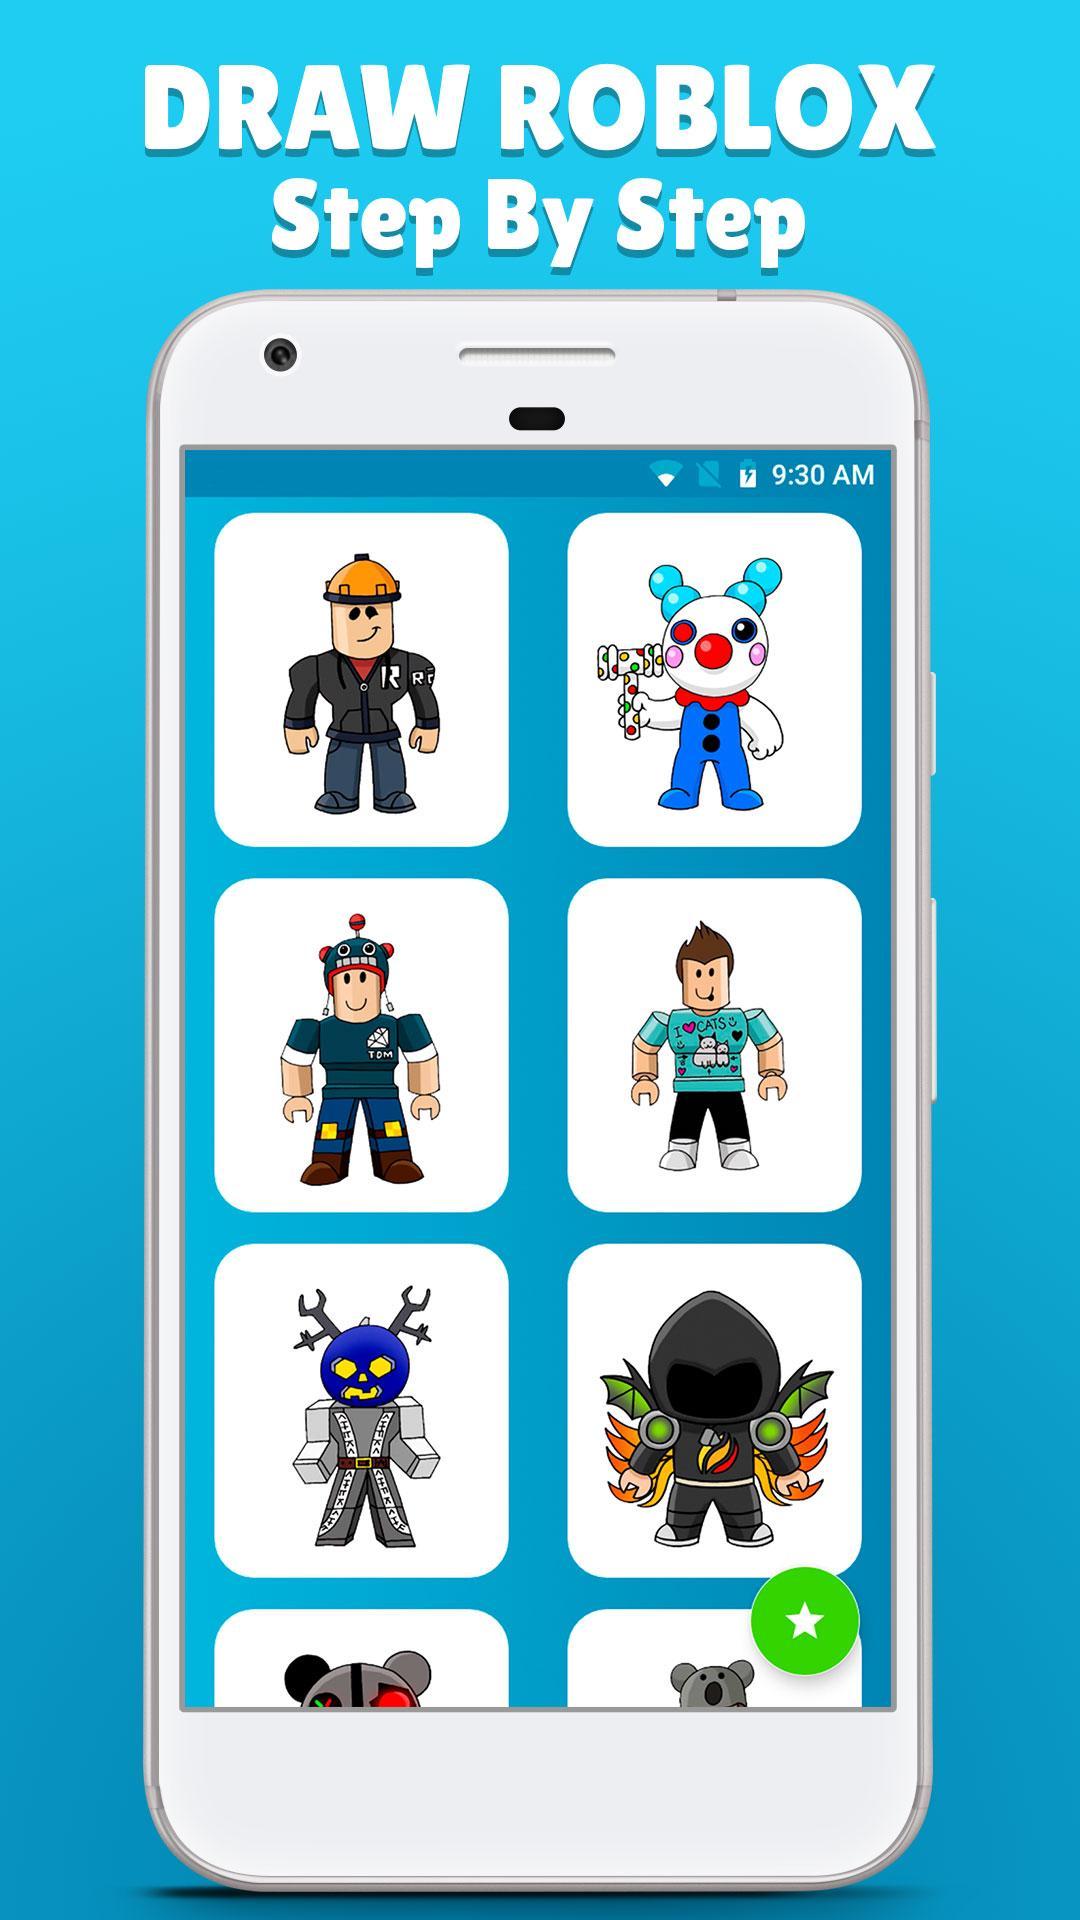 How To Draw Rblx Characters Step By Step For Android Apk Download - how to draw matt dusek roblox